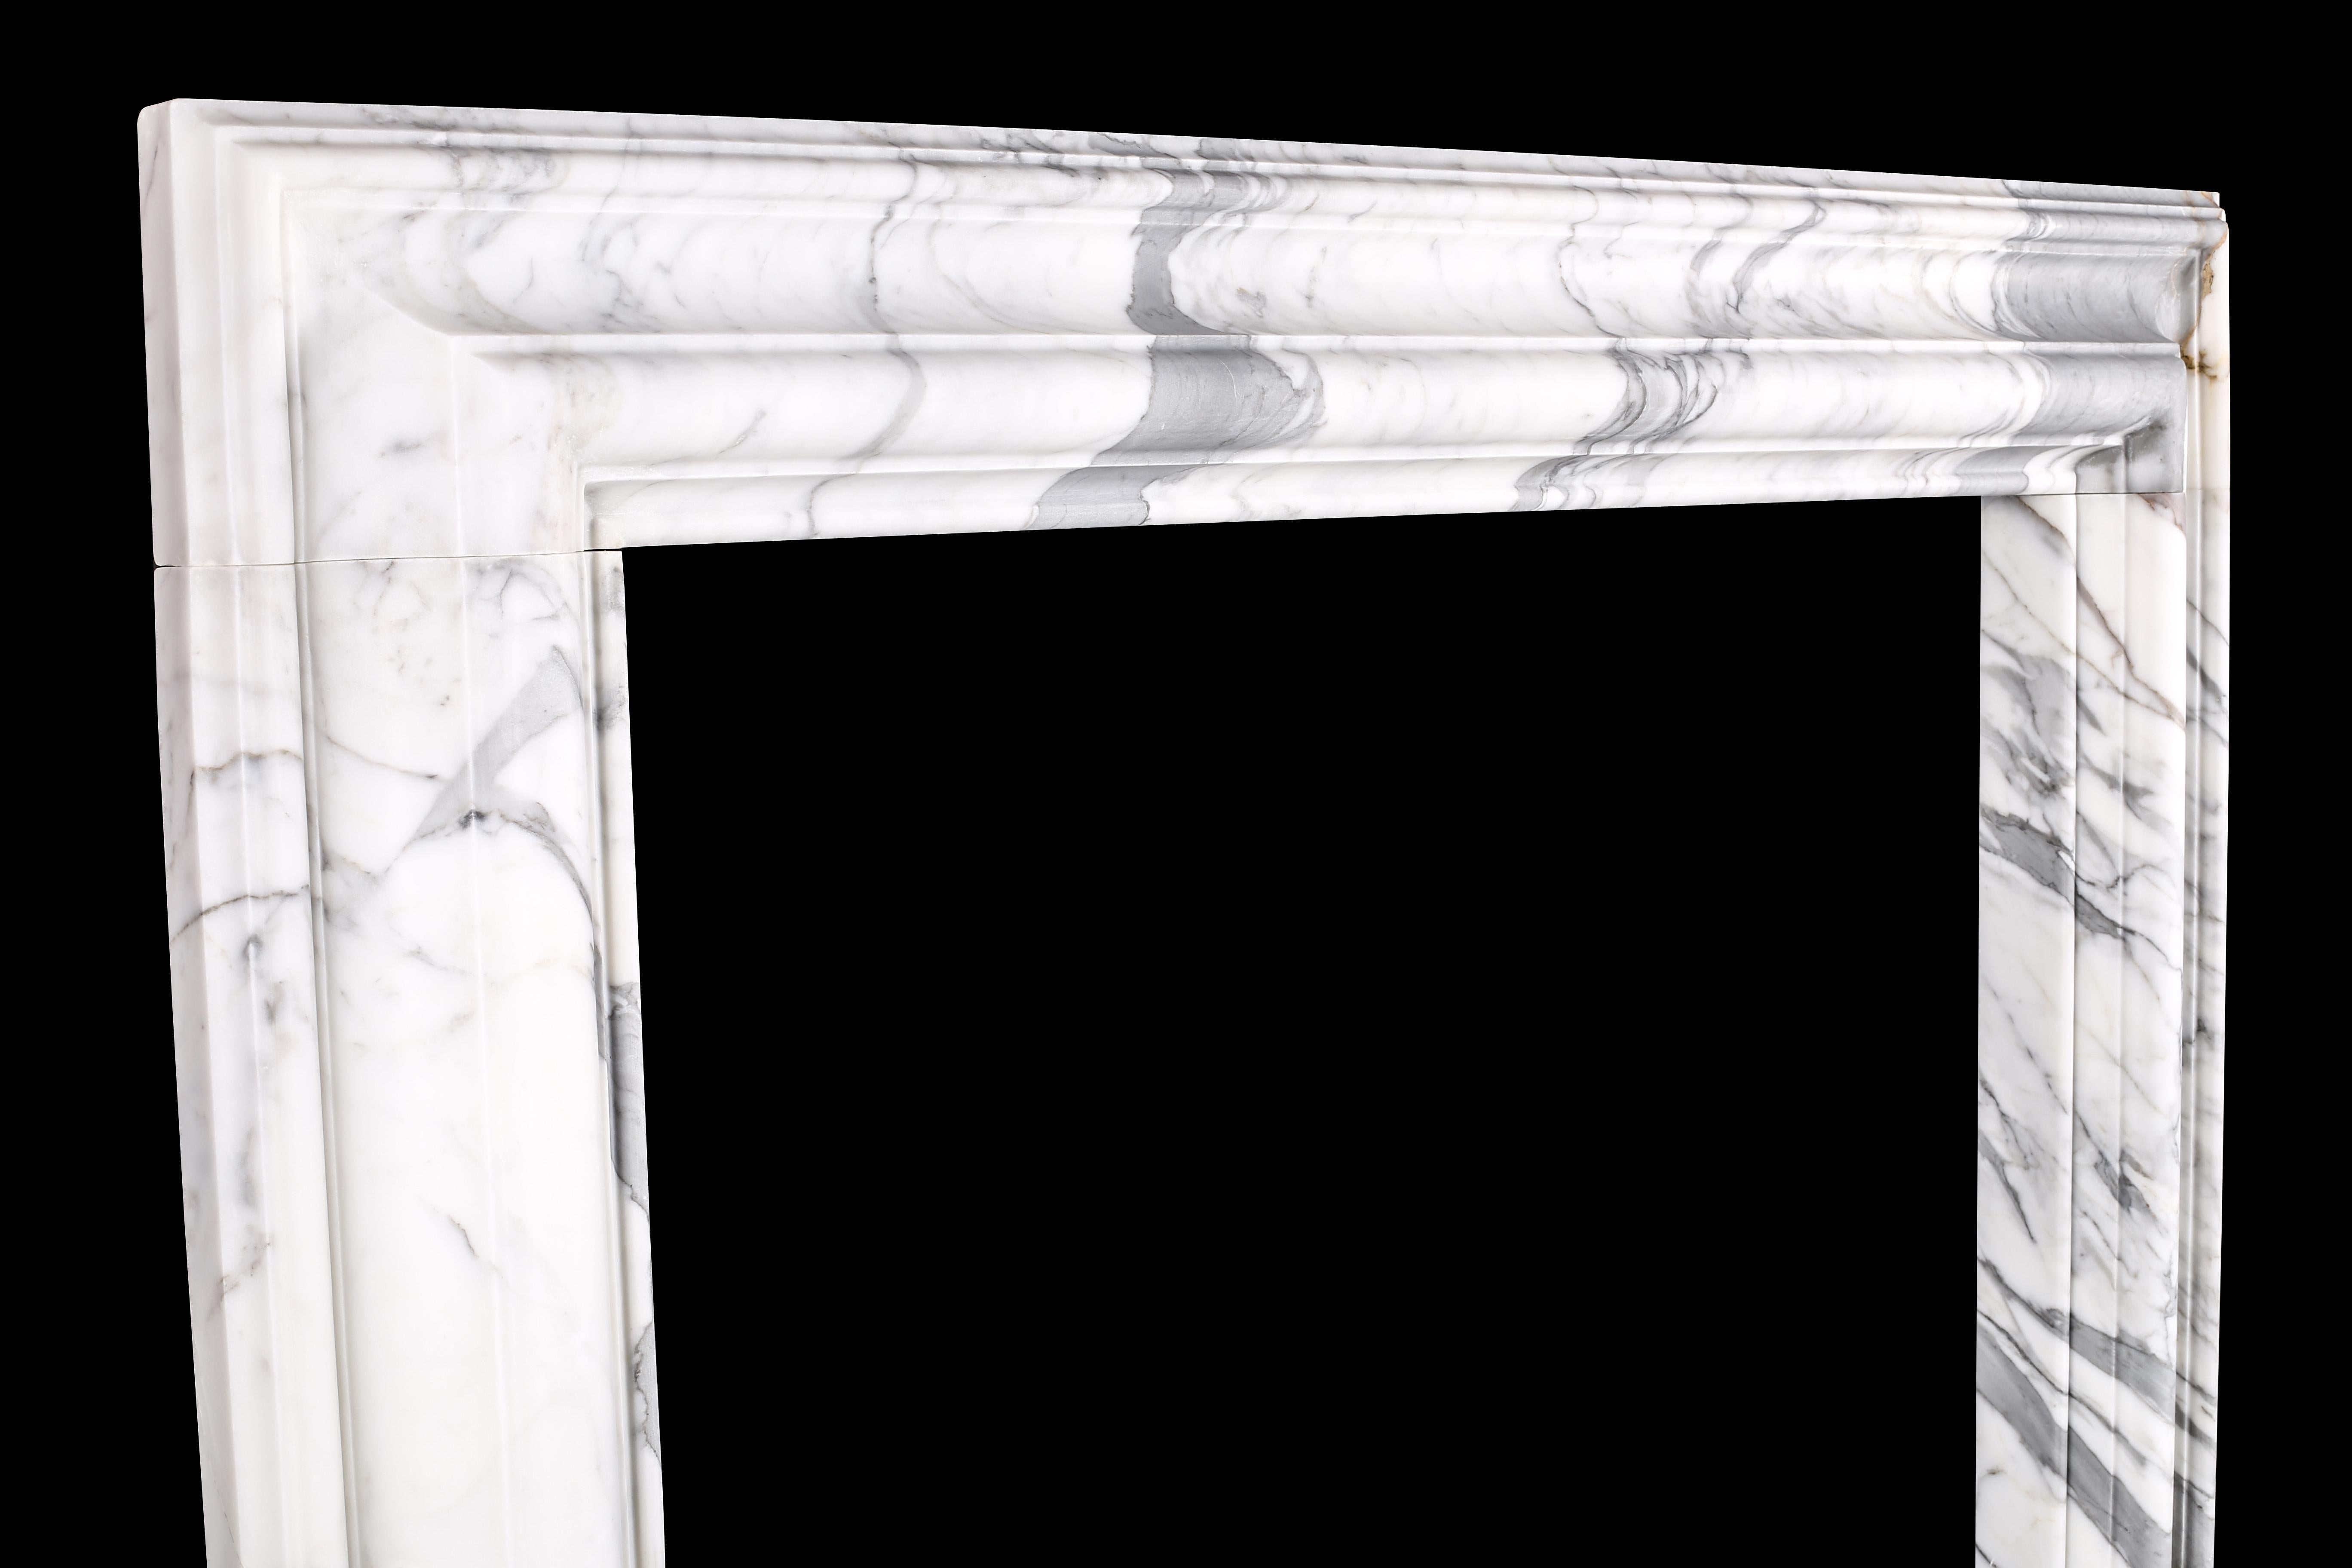 A baroque bolection fireplace surround Italian white statuary marble fireplace 6.

A baroque style bolection fireplace surround of bold proportions with very finely carved columns with a rising ogee edging, which are supported on substantial